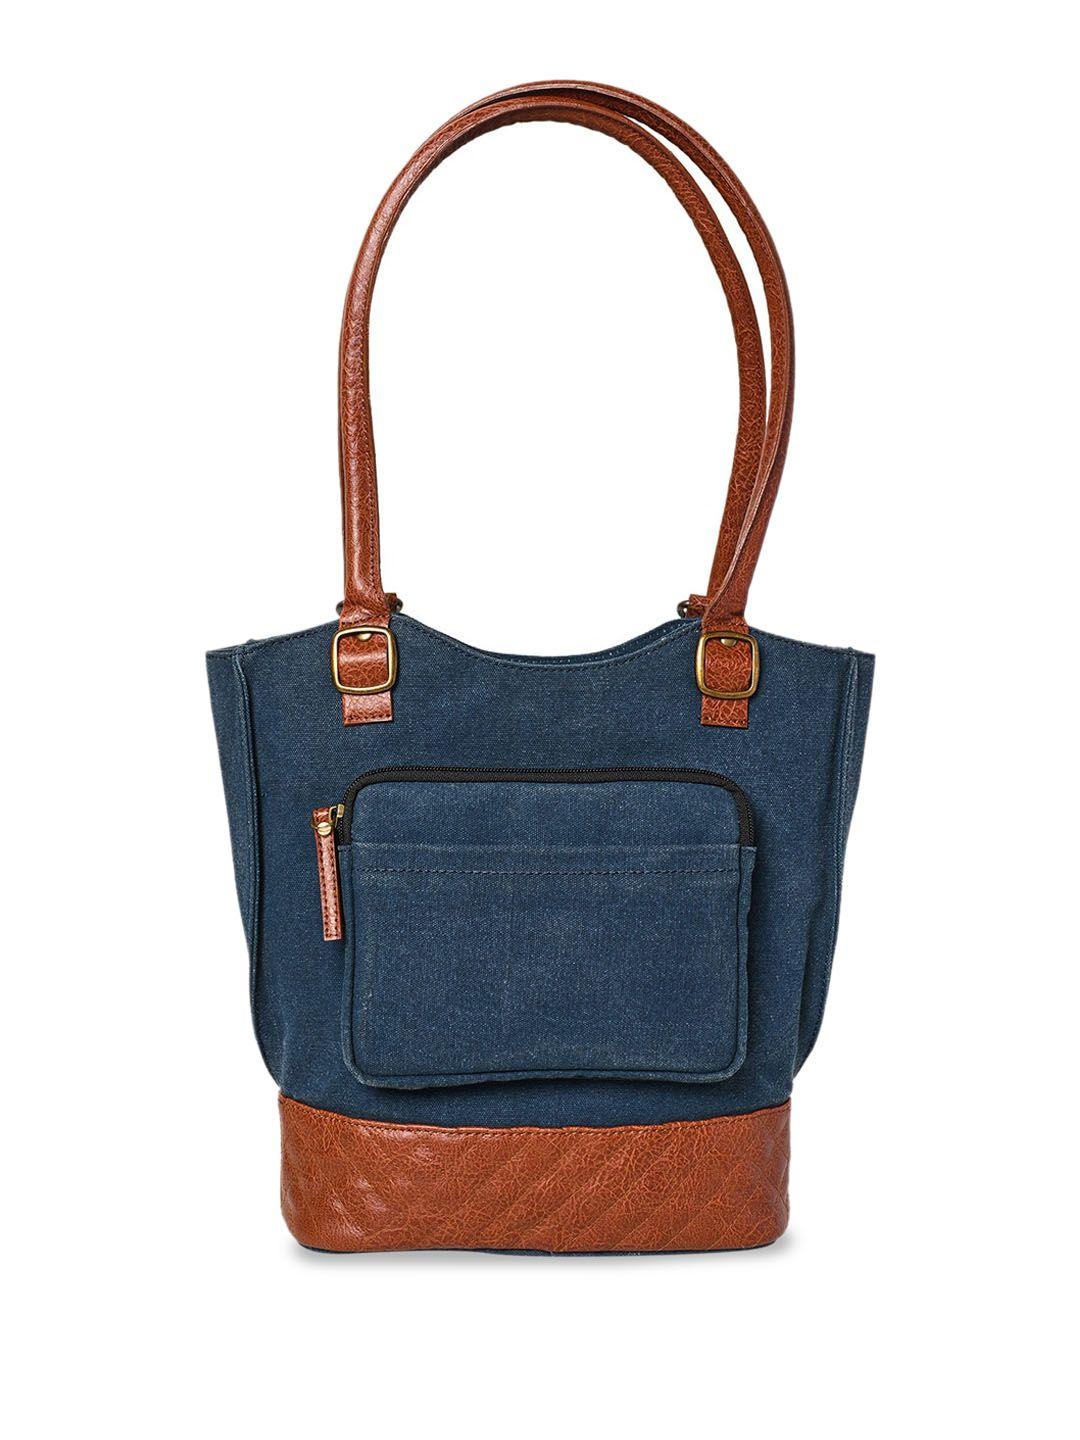 Mona B Navy Blue Colourblocked Structured Shoulder Bag with Applique